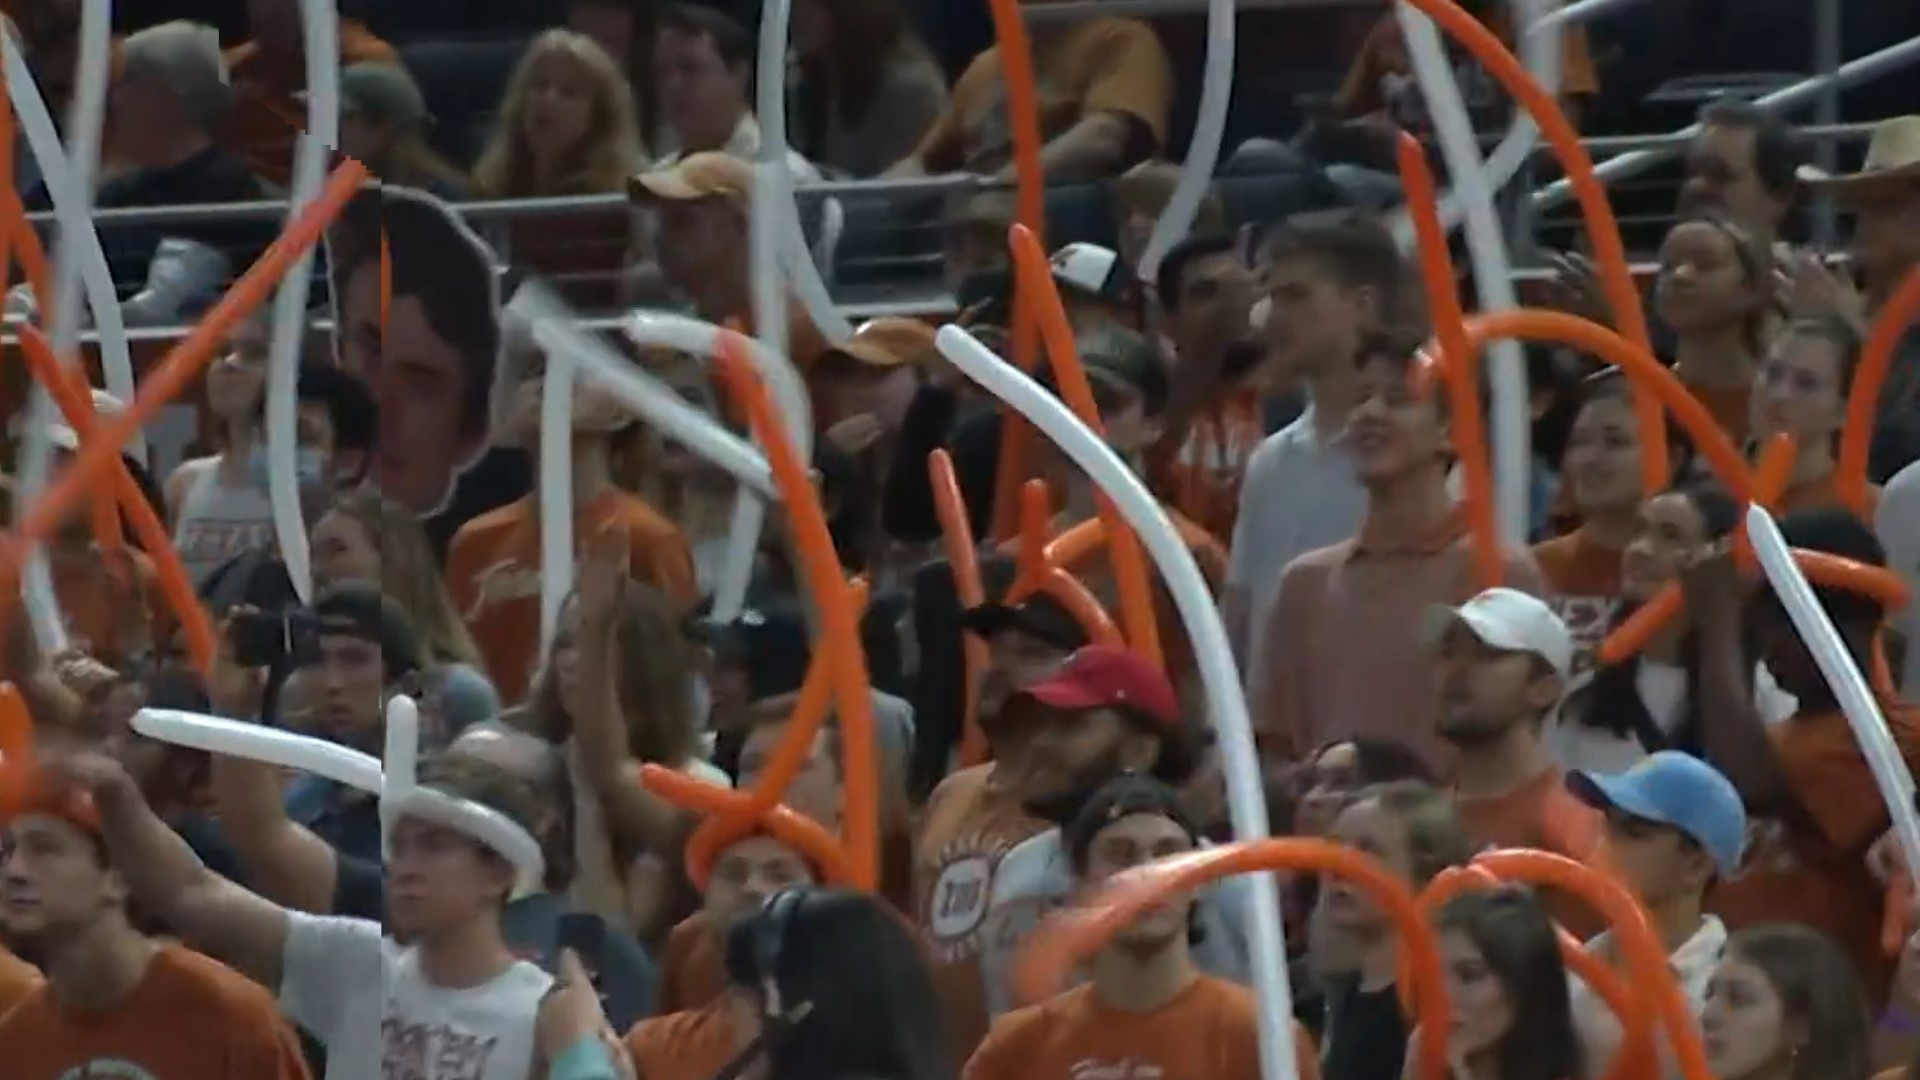 The study said fans of the Texas Longhorns spent more than $50 on alcoholic beverages during the tournament.